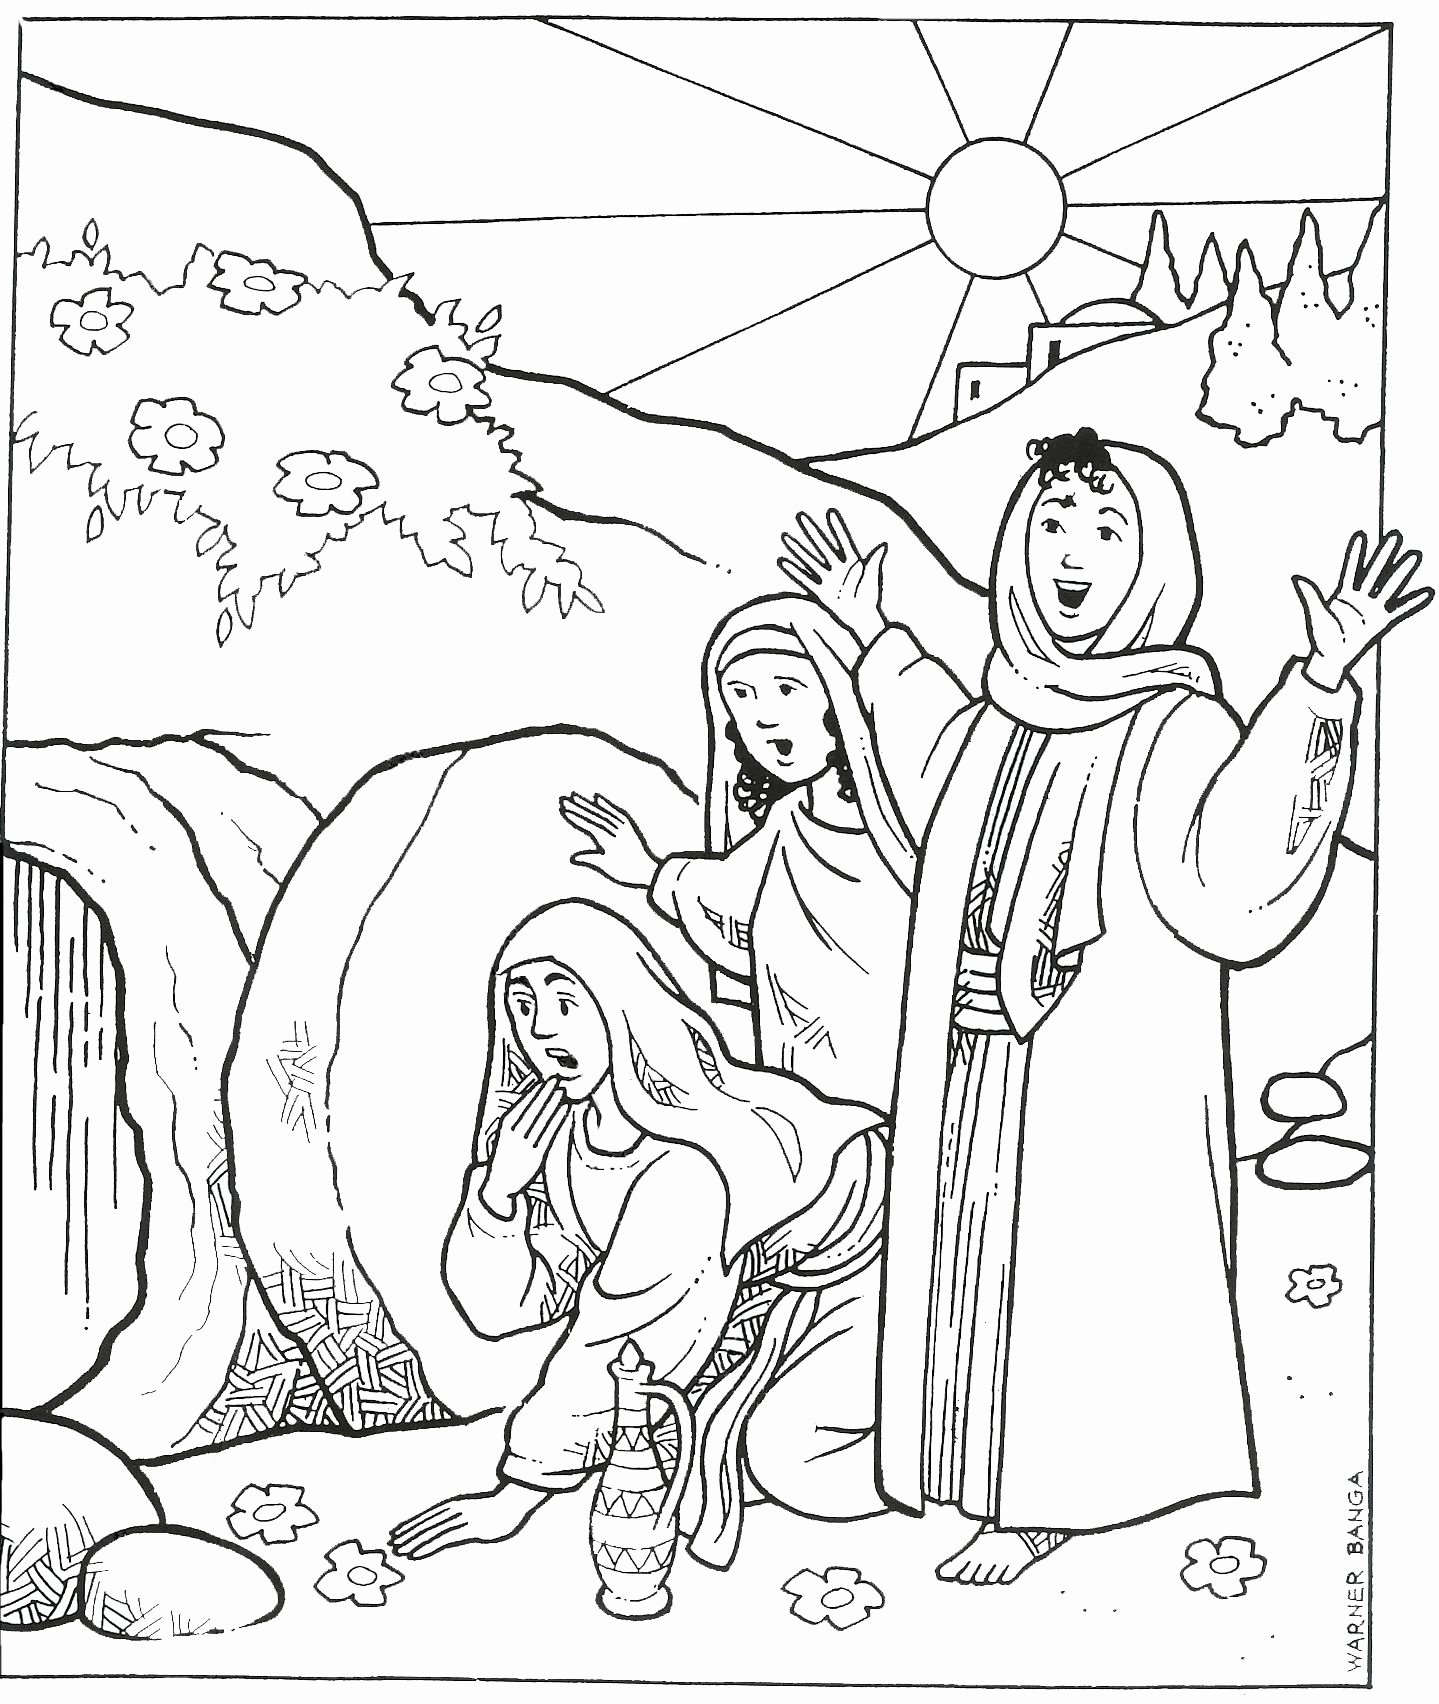 empty tomb drawing